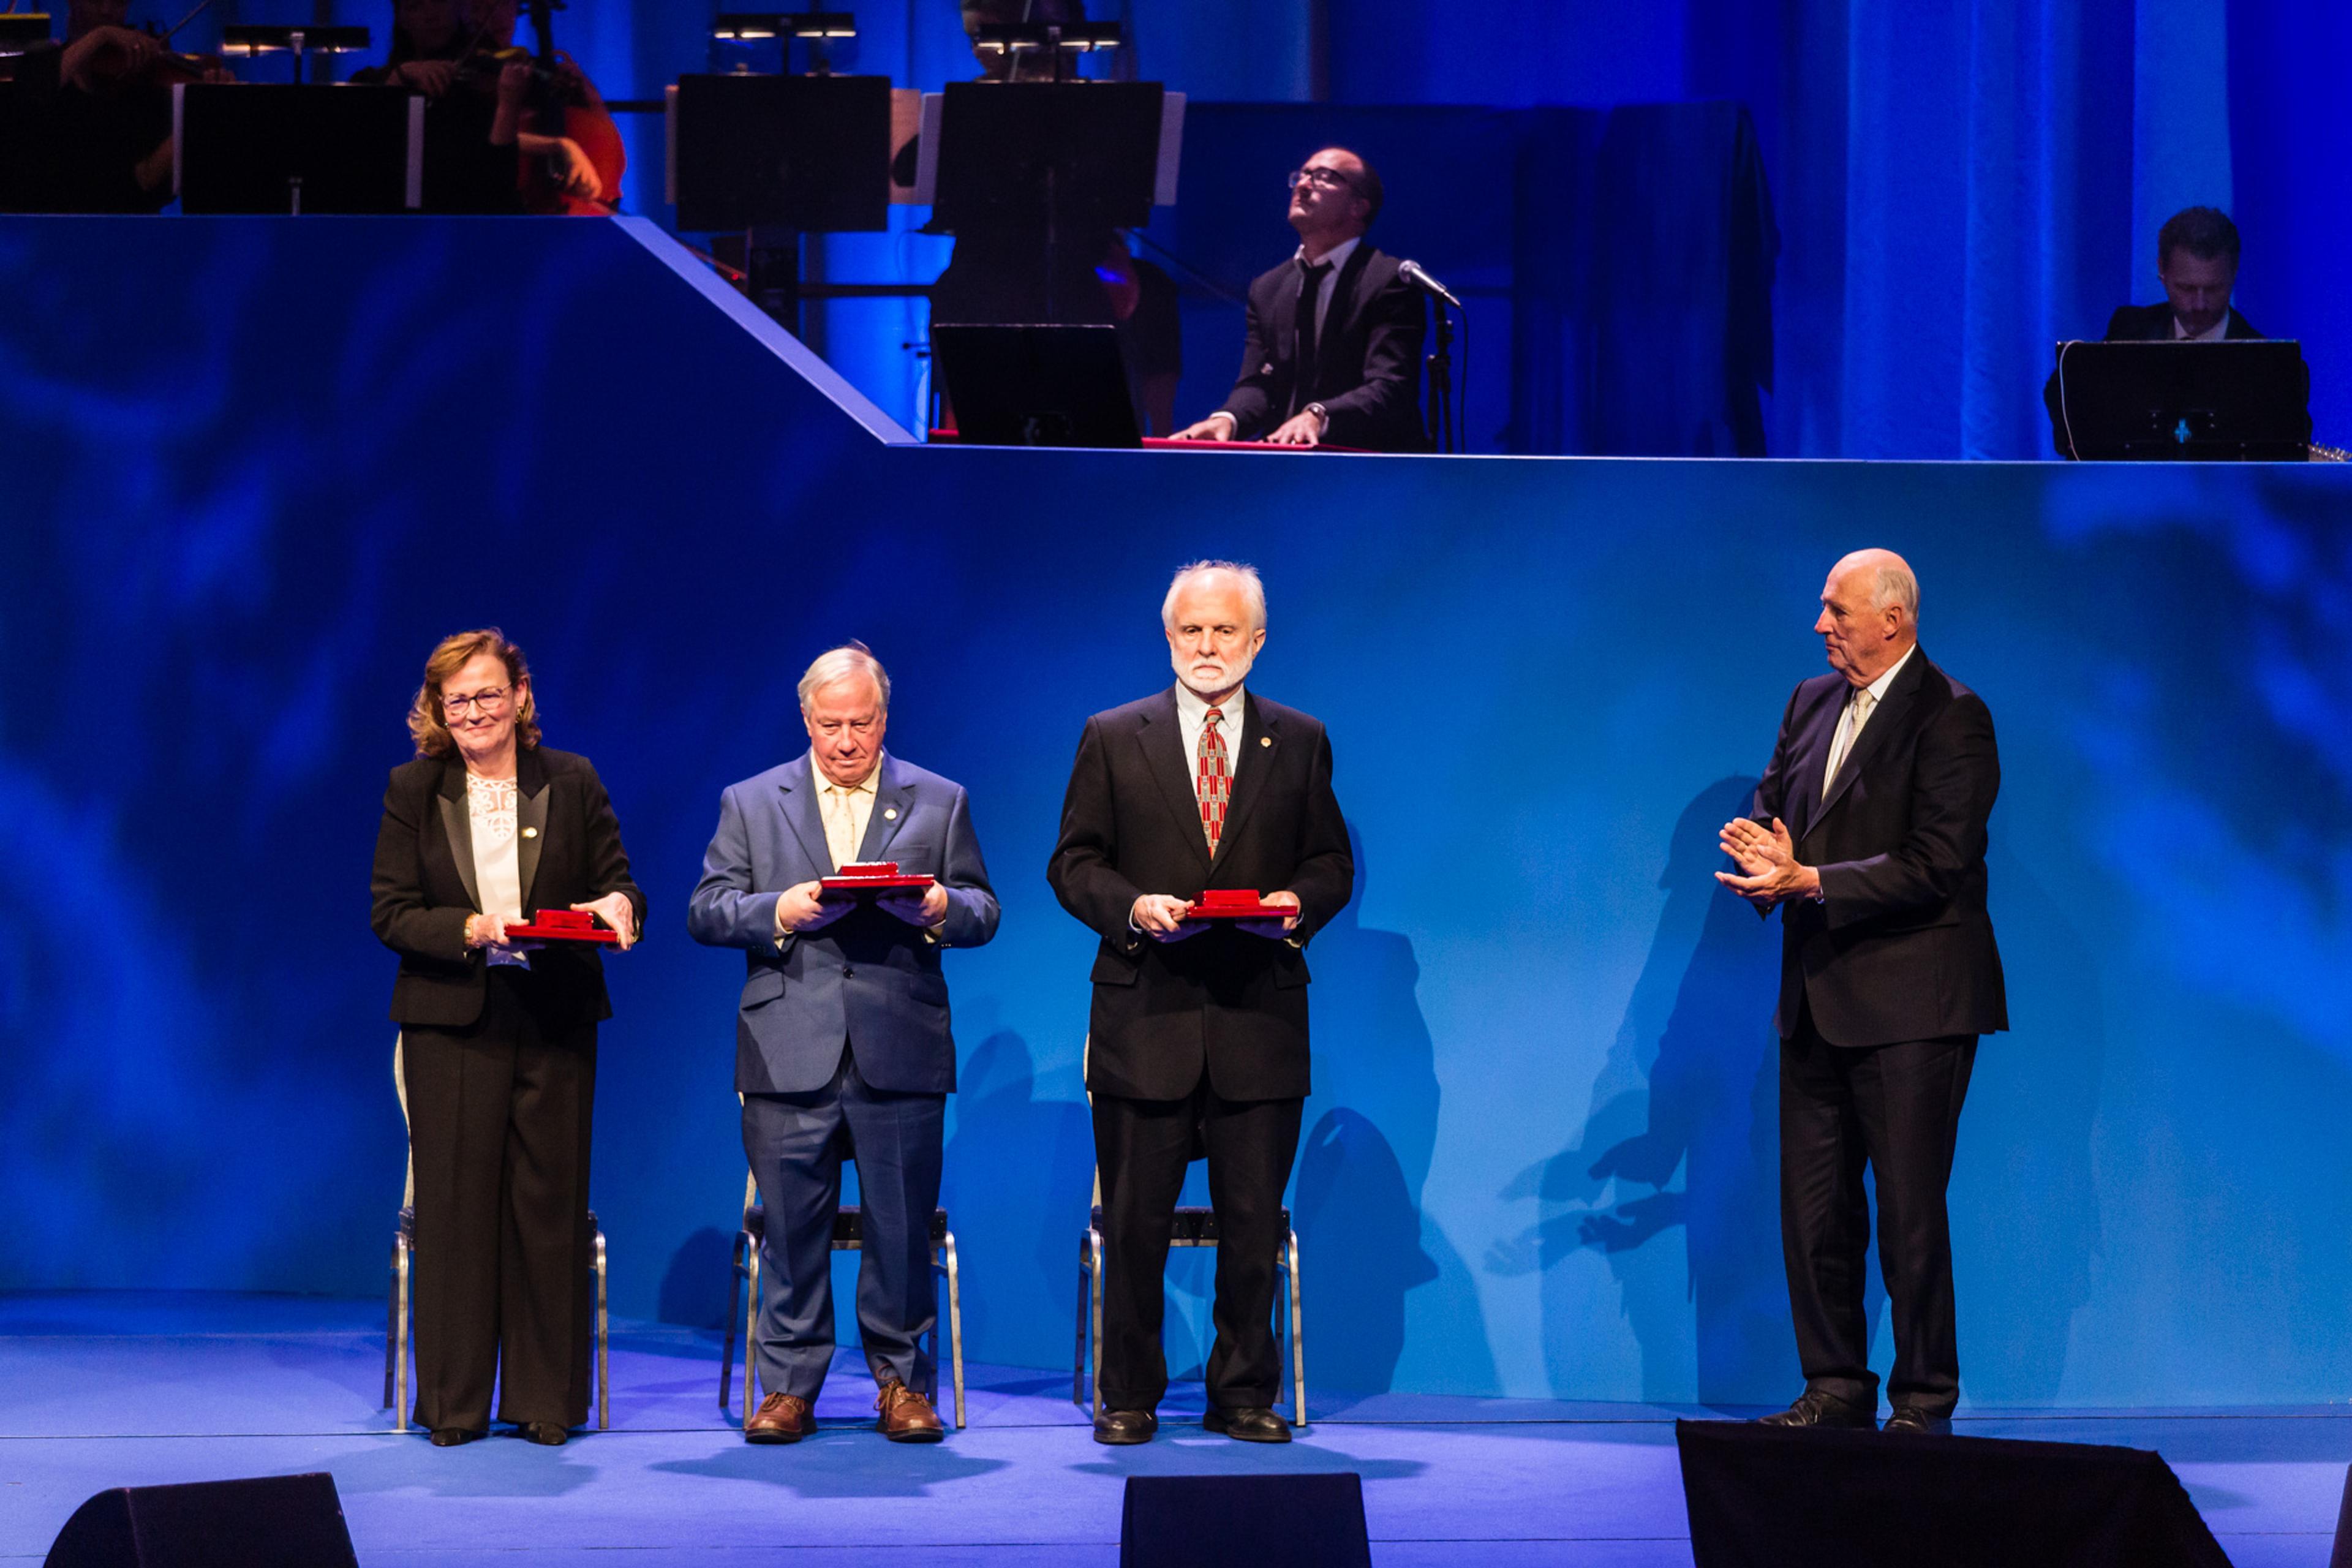 The 2018 Kavli Prize neuroscience laureates on stage in Oslo Concert Hall 